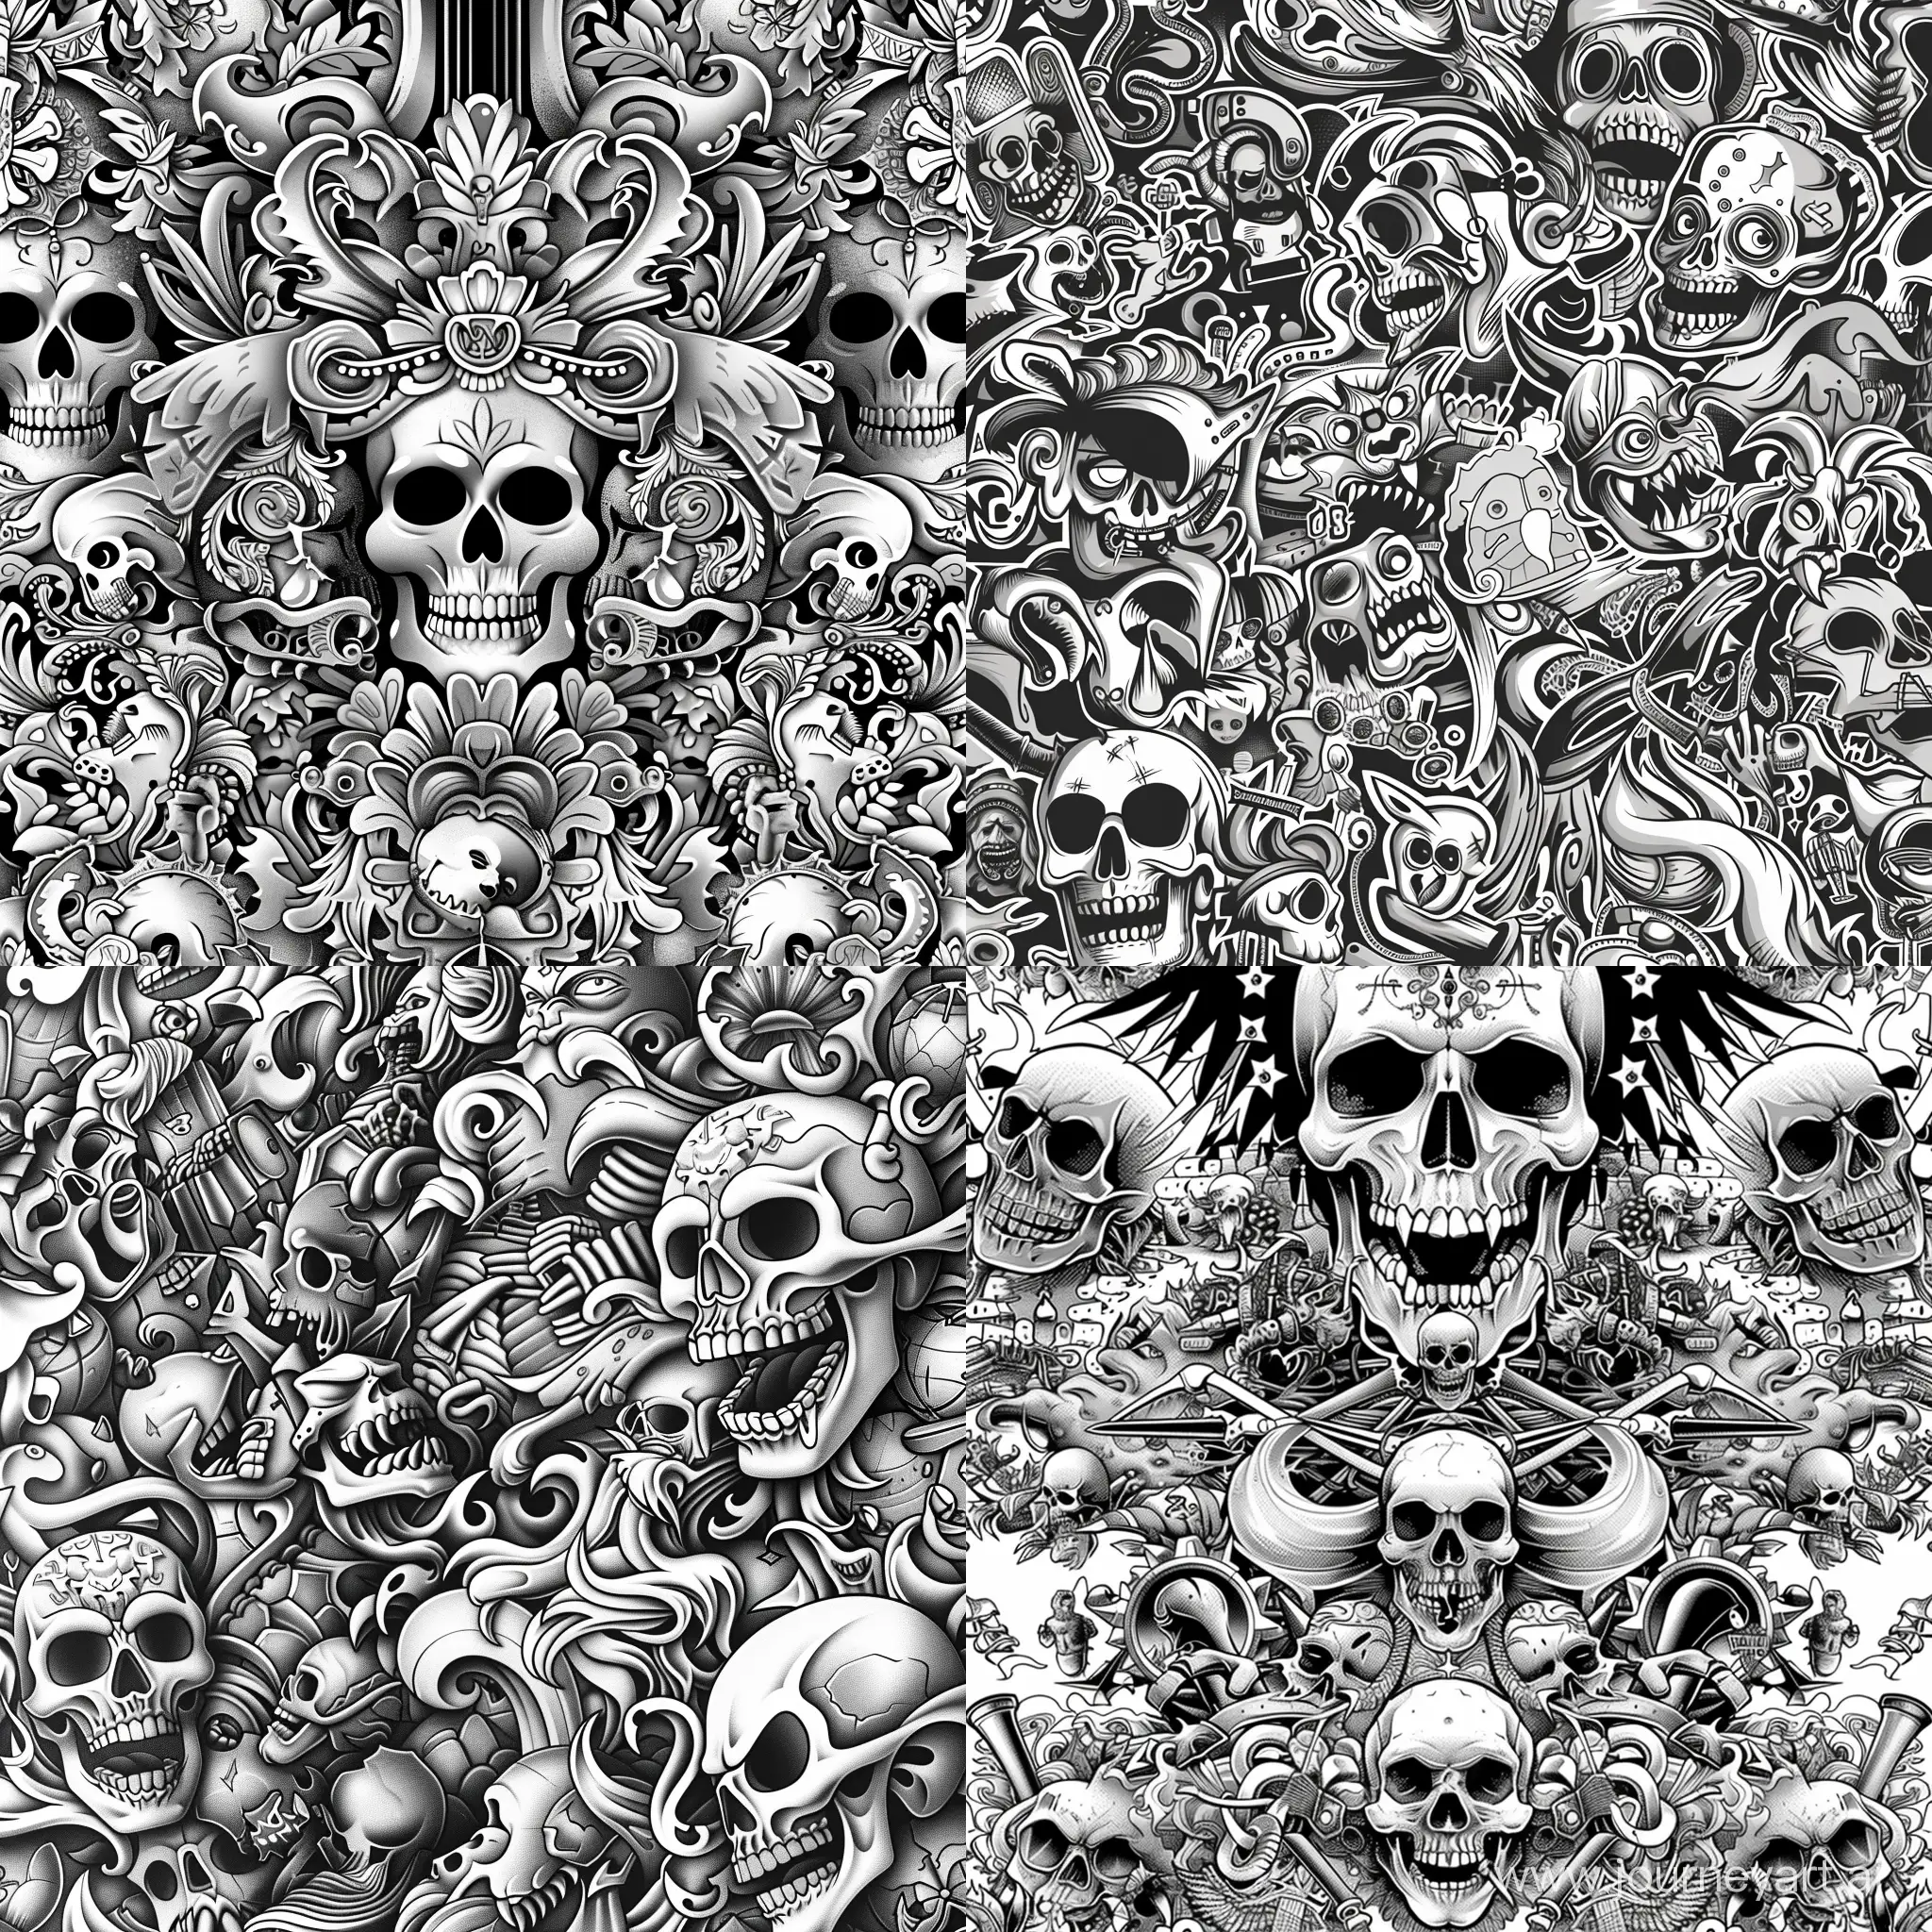 Intricate-Greyscale-Sticker-Bomb-Art-NatureInspired-Heavy-Metal-Bands-Pattern